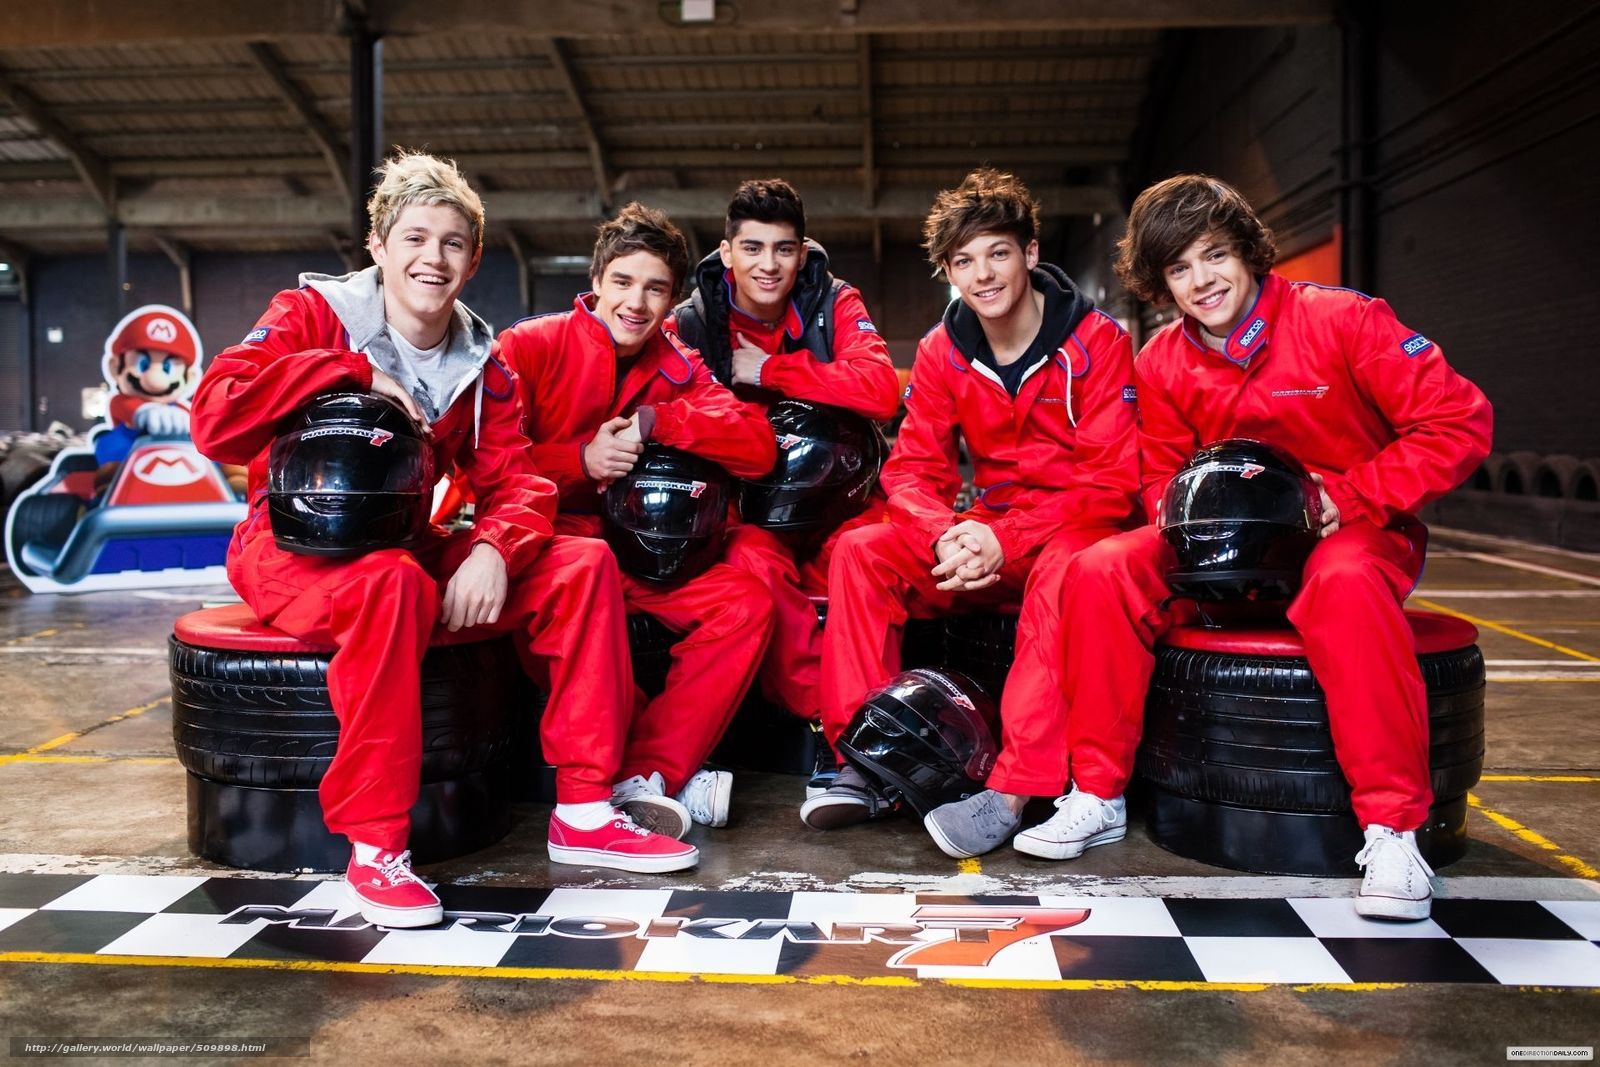 Download Wallpaper One Direction, Niall Horan, Harry - One Direction Mario Kart - HD Wallpaper 